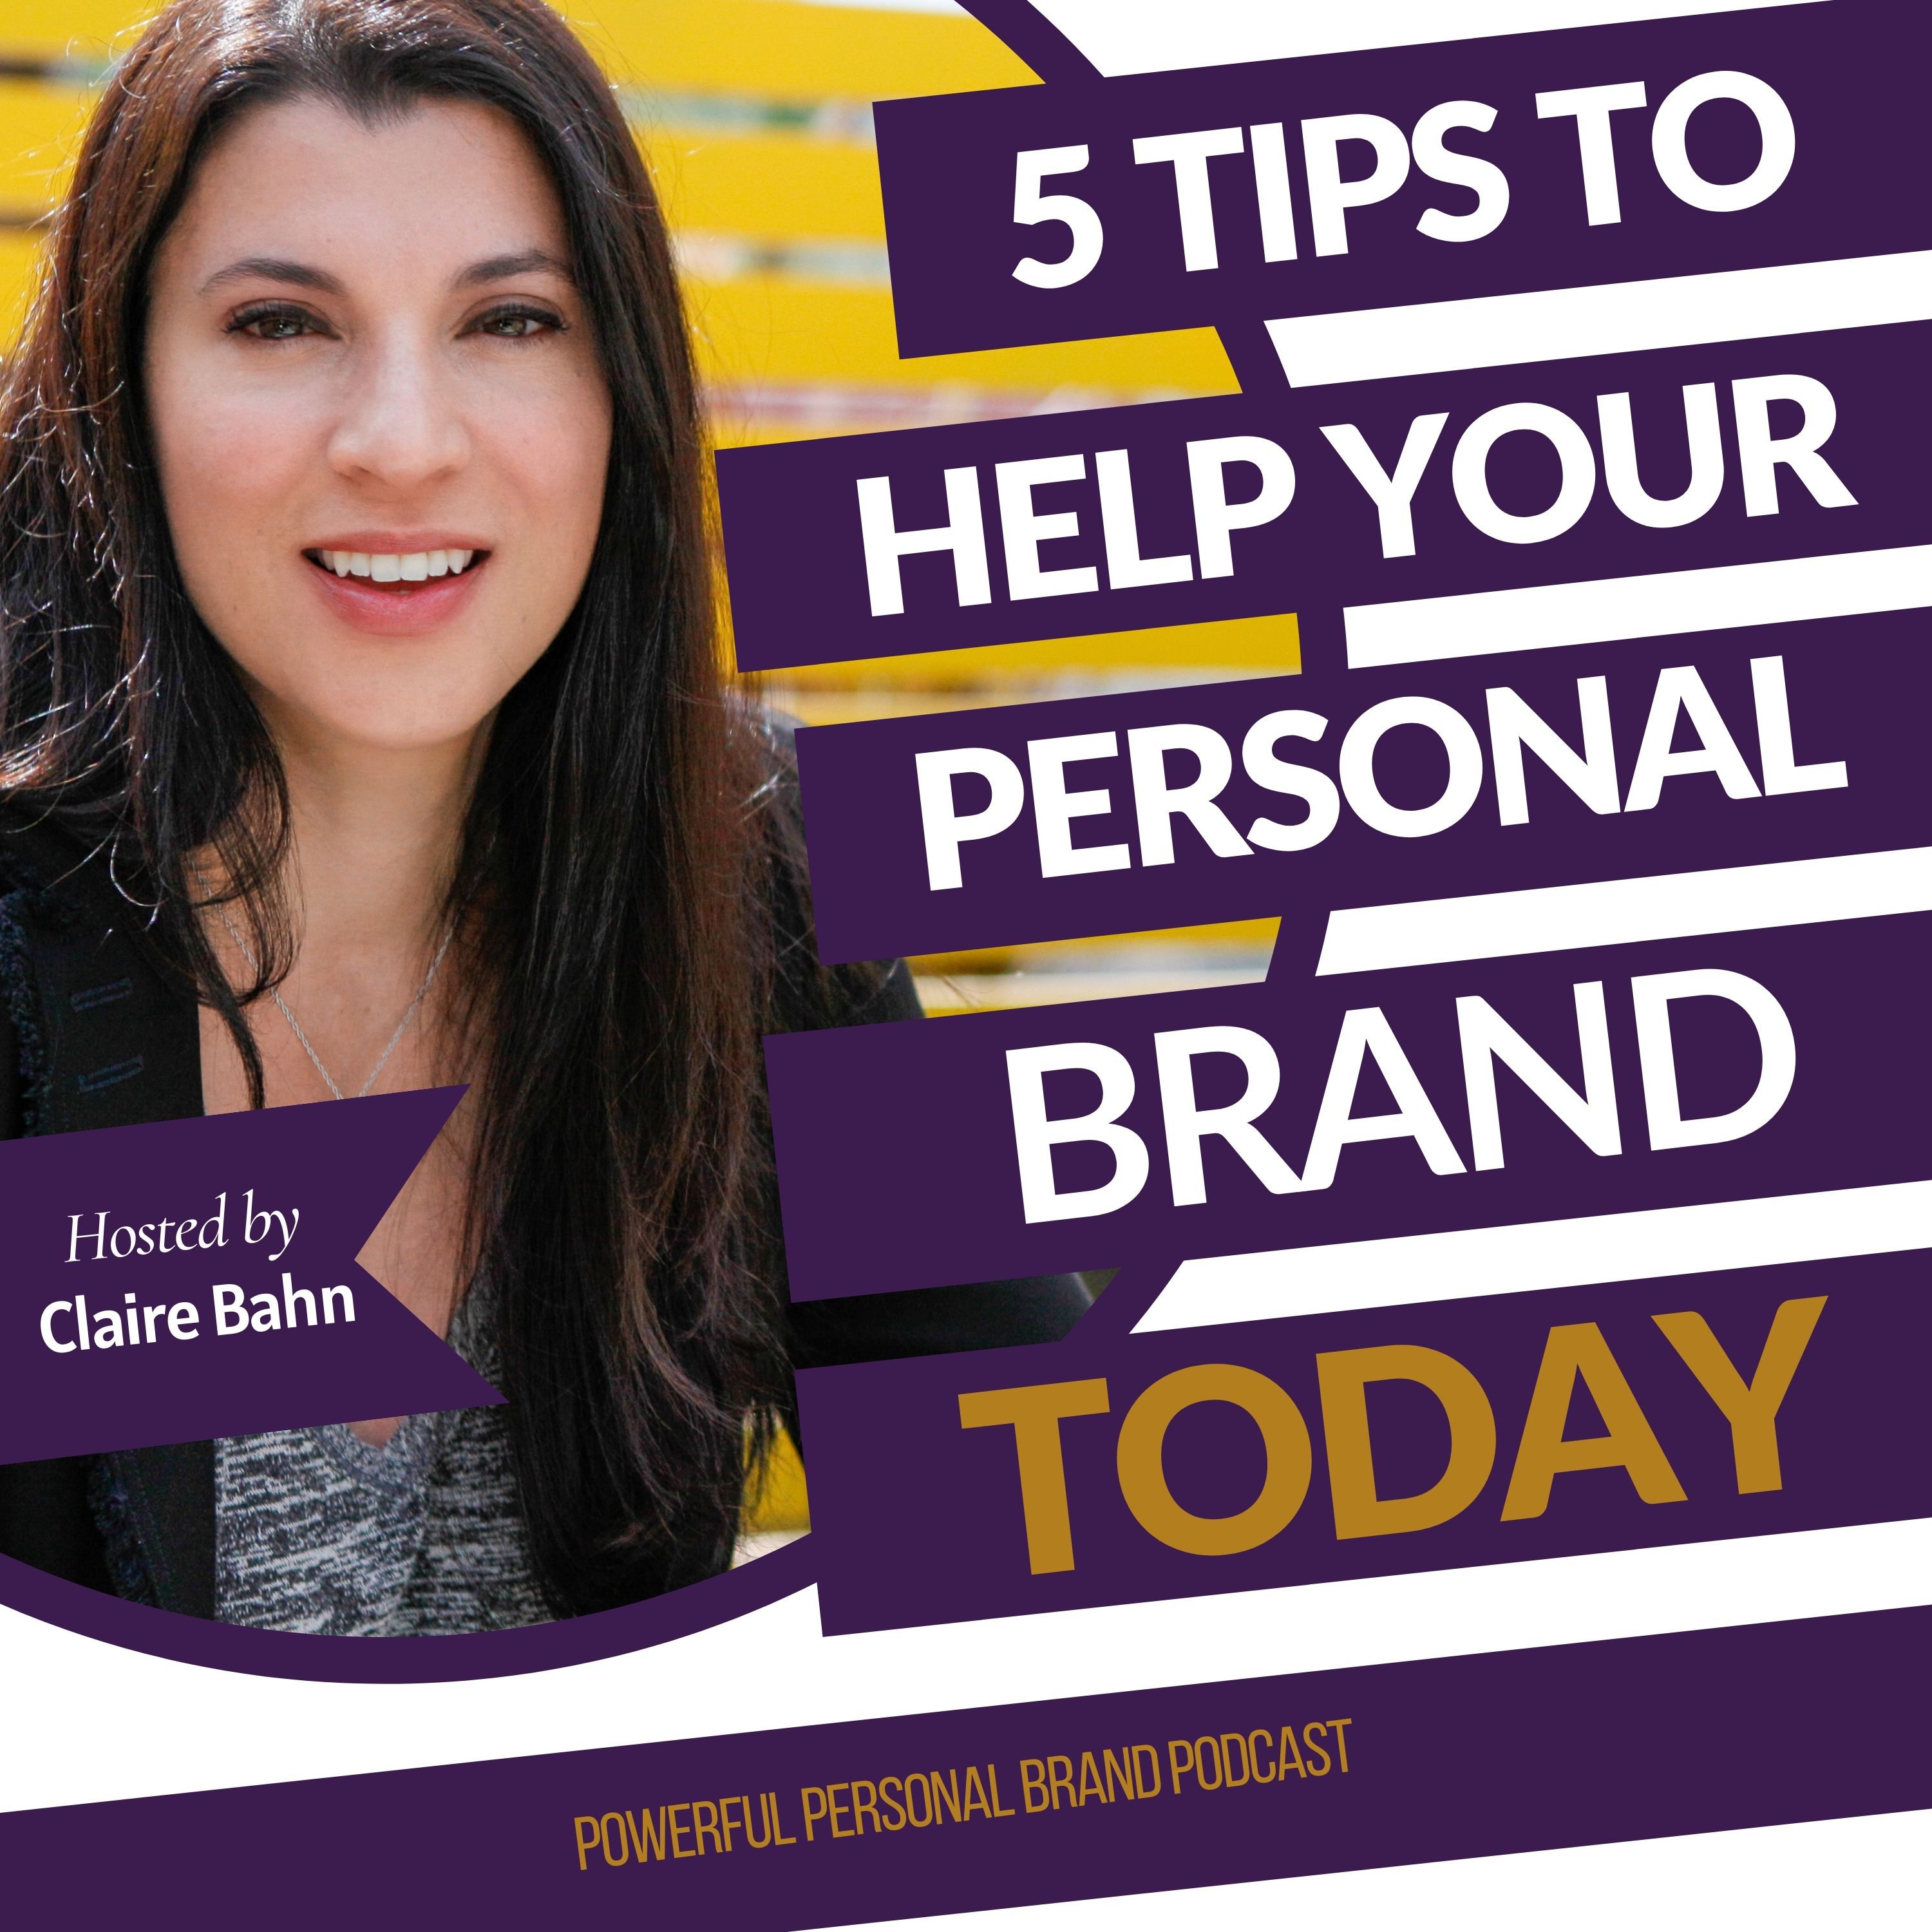 Artwork for podcast Powerful Personal Brand Podcast with Claire Bahn